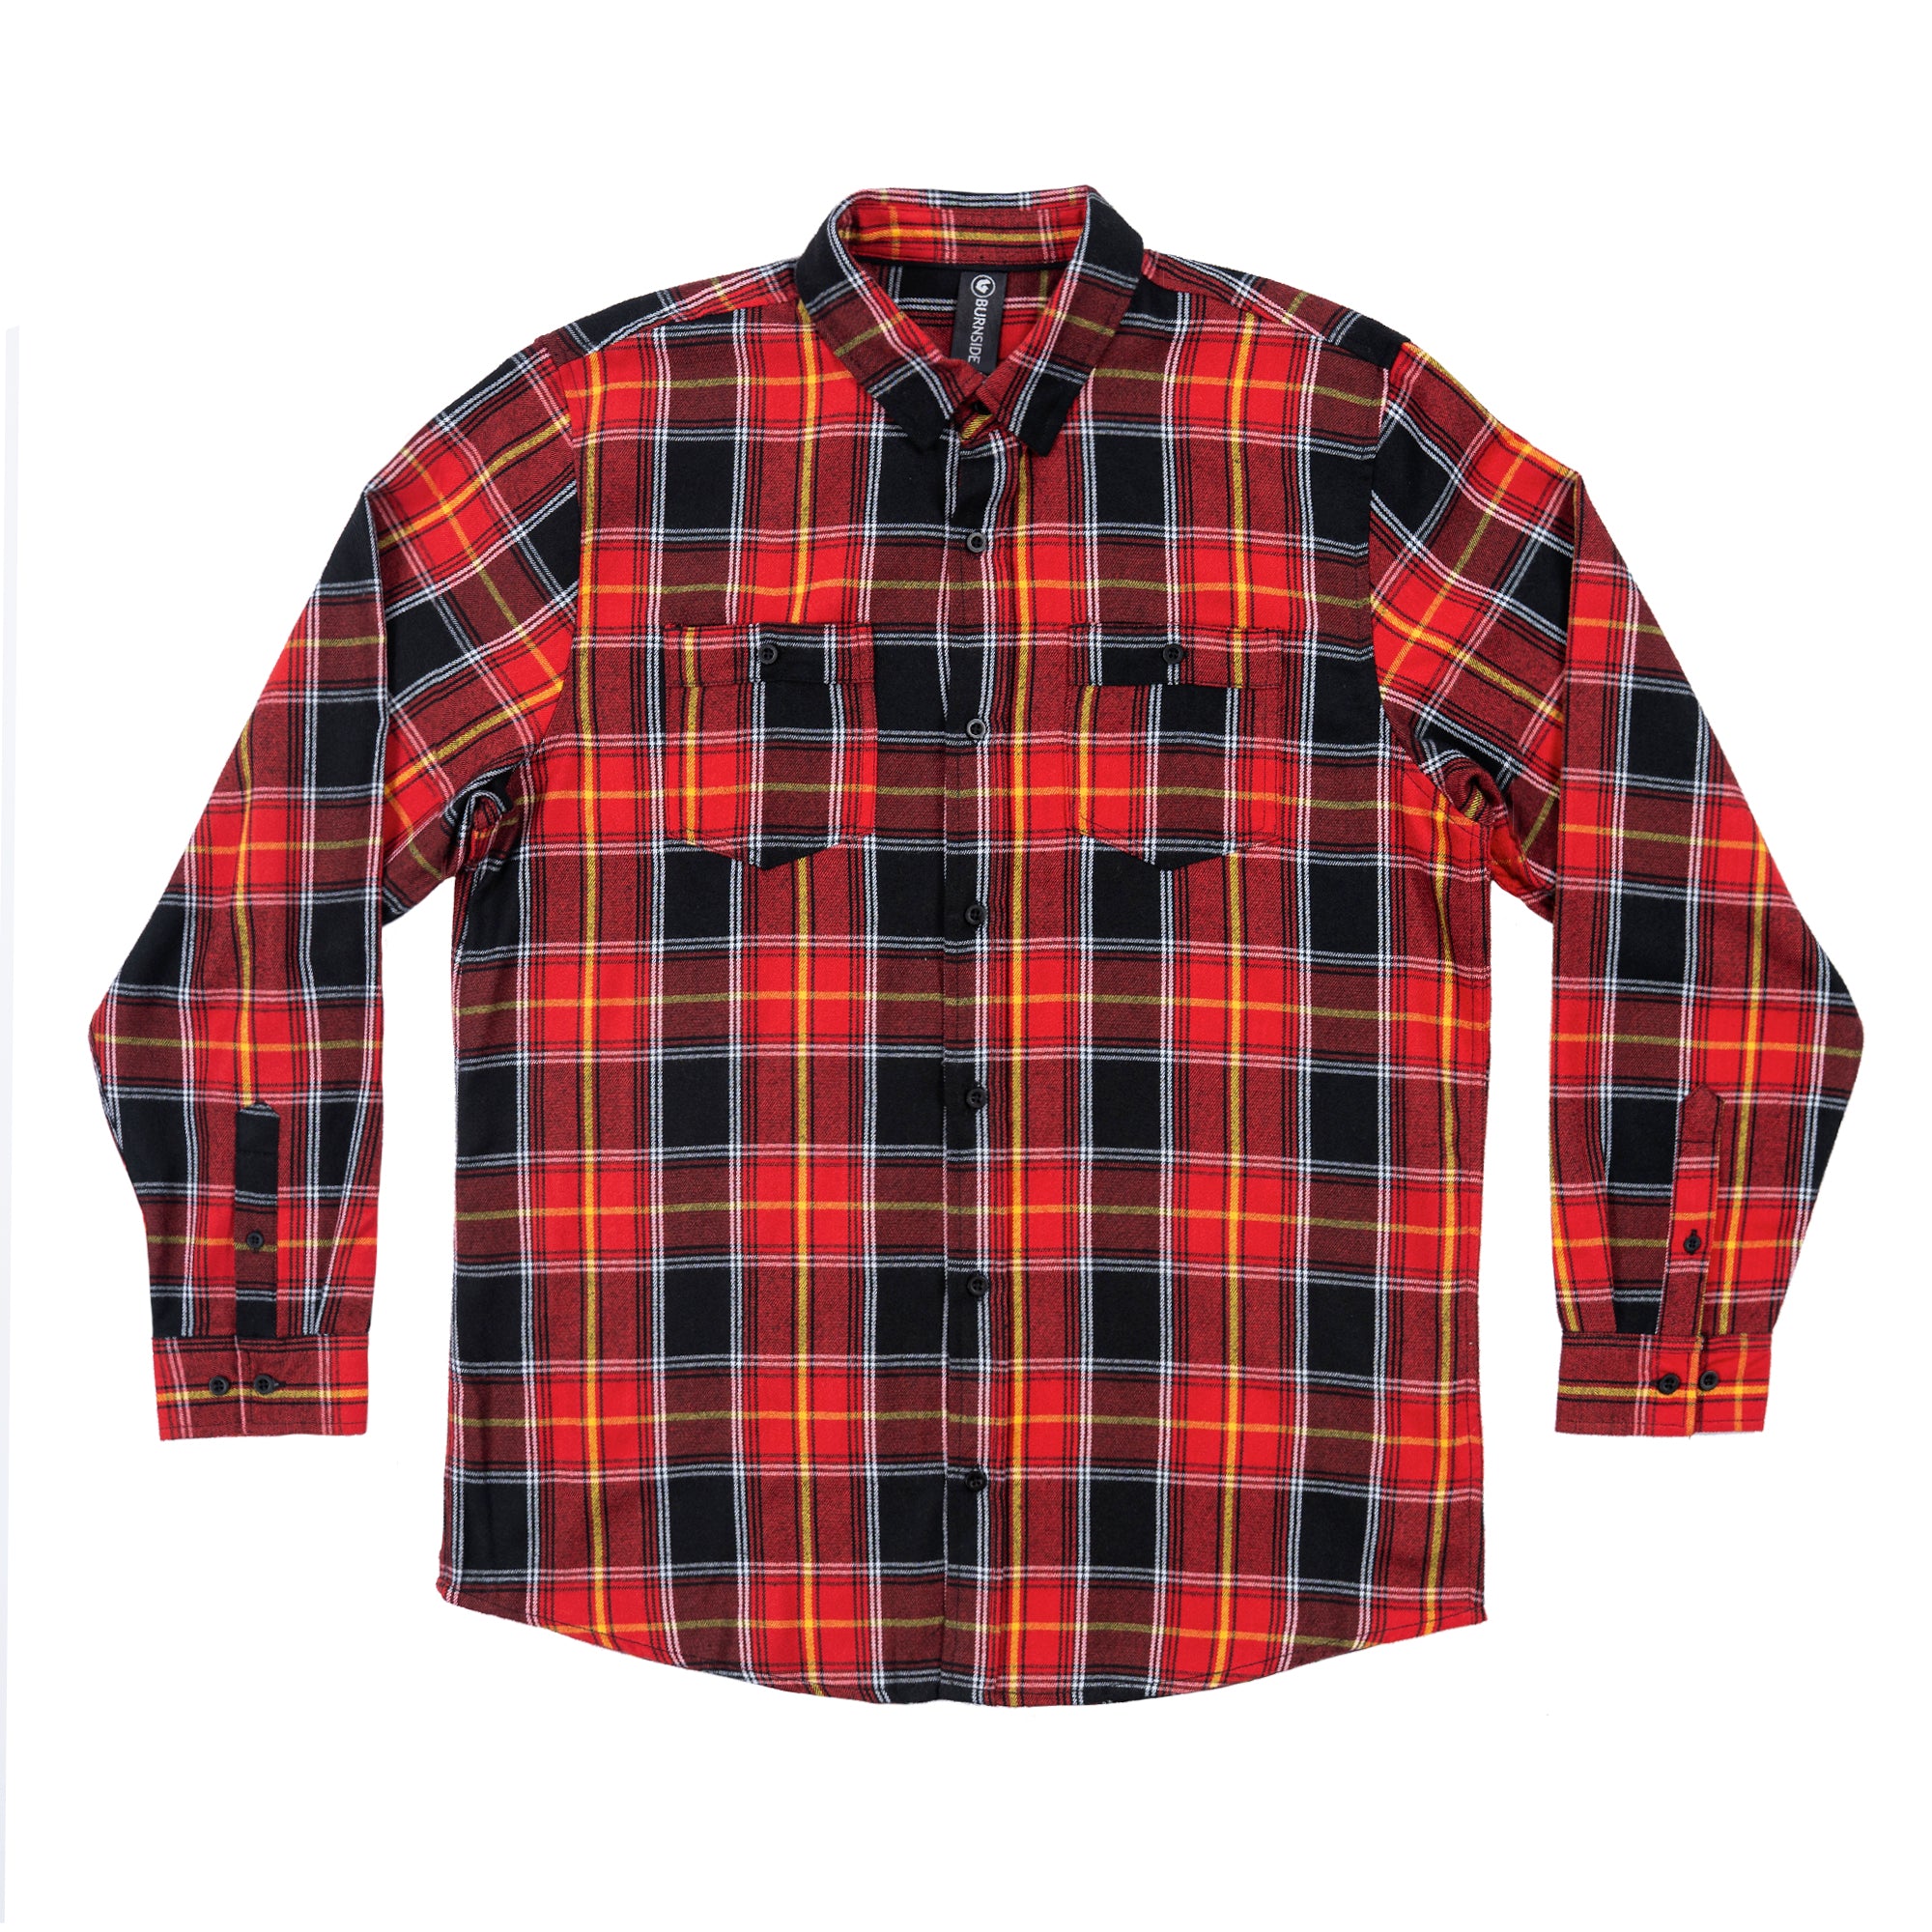 "PERFECT" FLANNEL